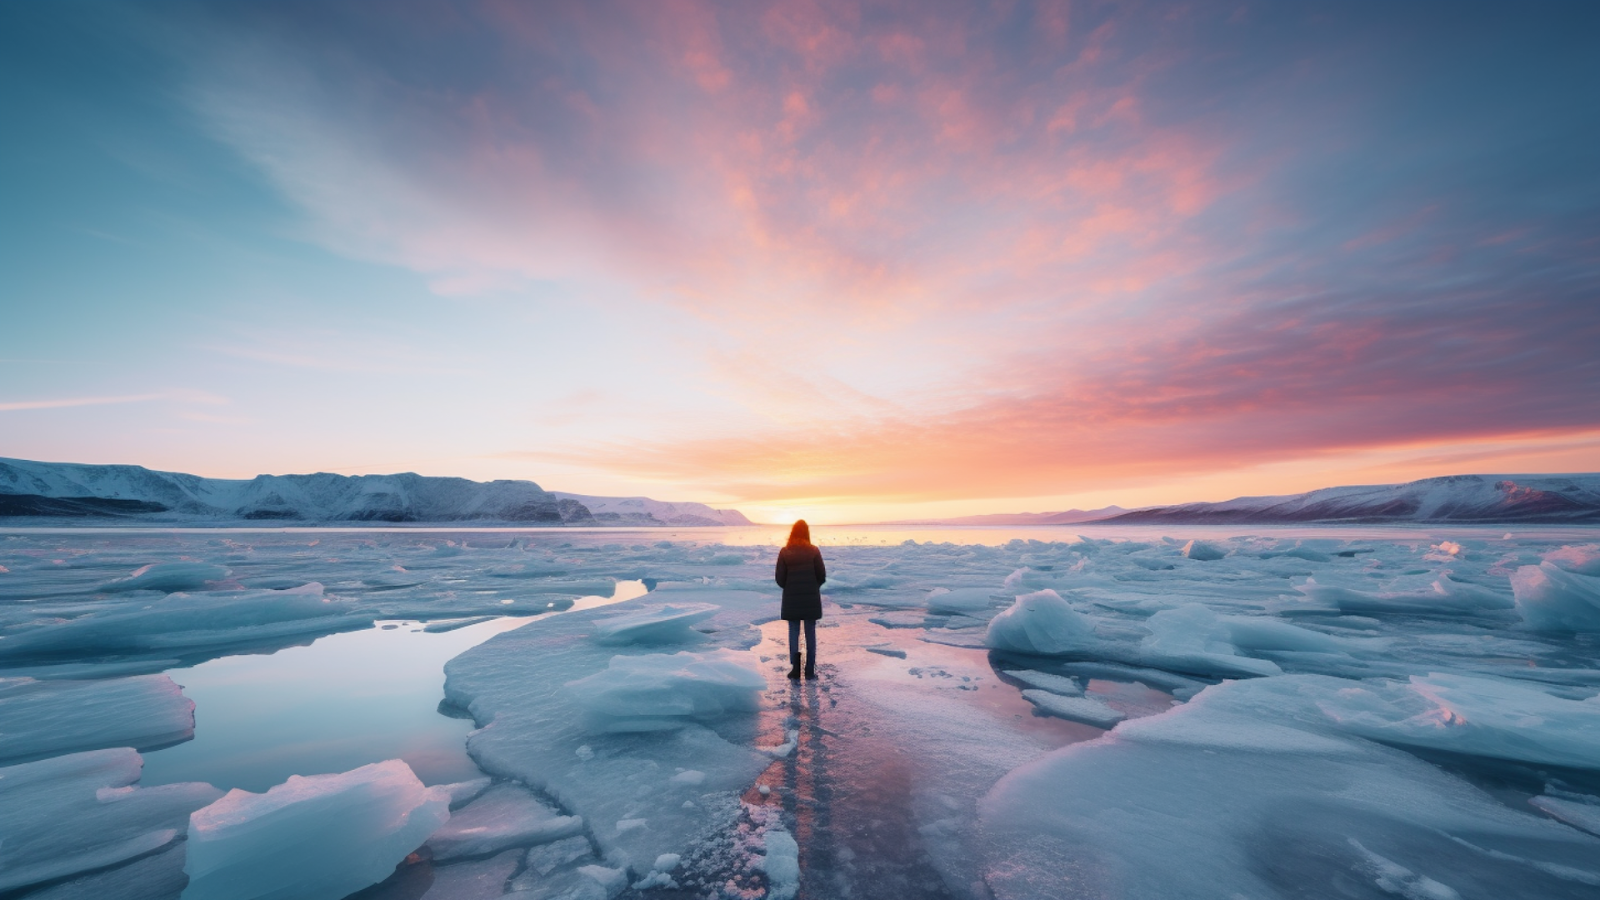 A lone traveler gazes across the icy expanse of Lake Baikal at sunset, embodying the tranquil beauty of Siberia's top winter destinations.